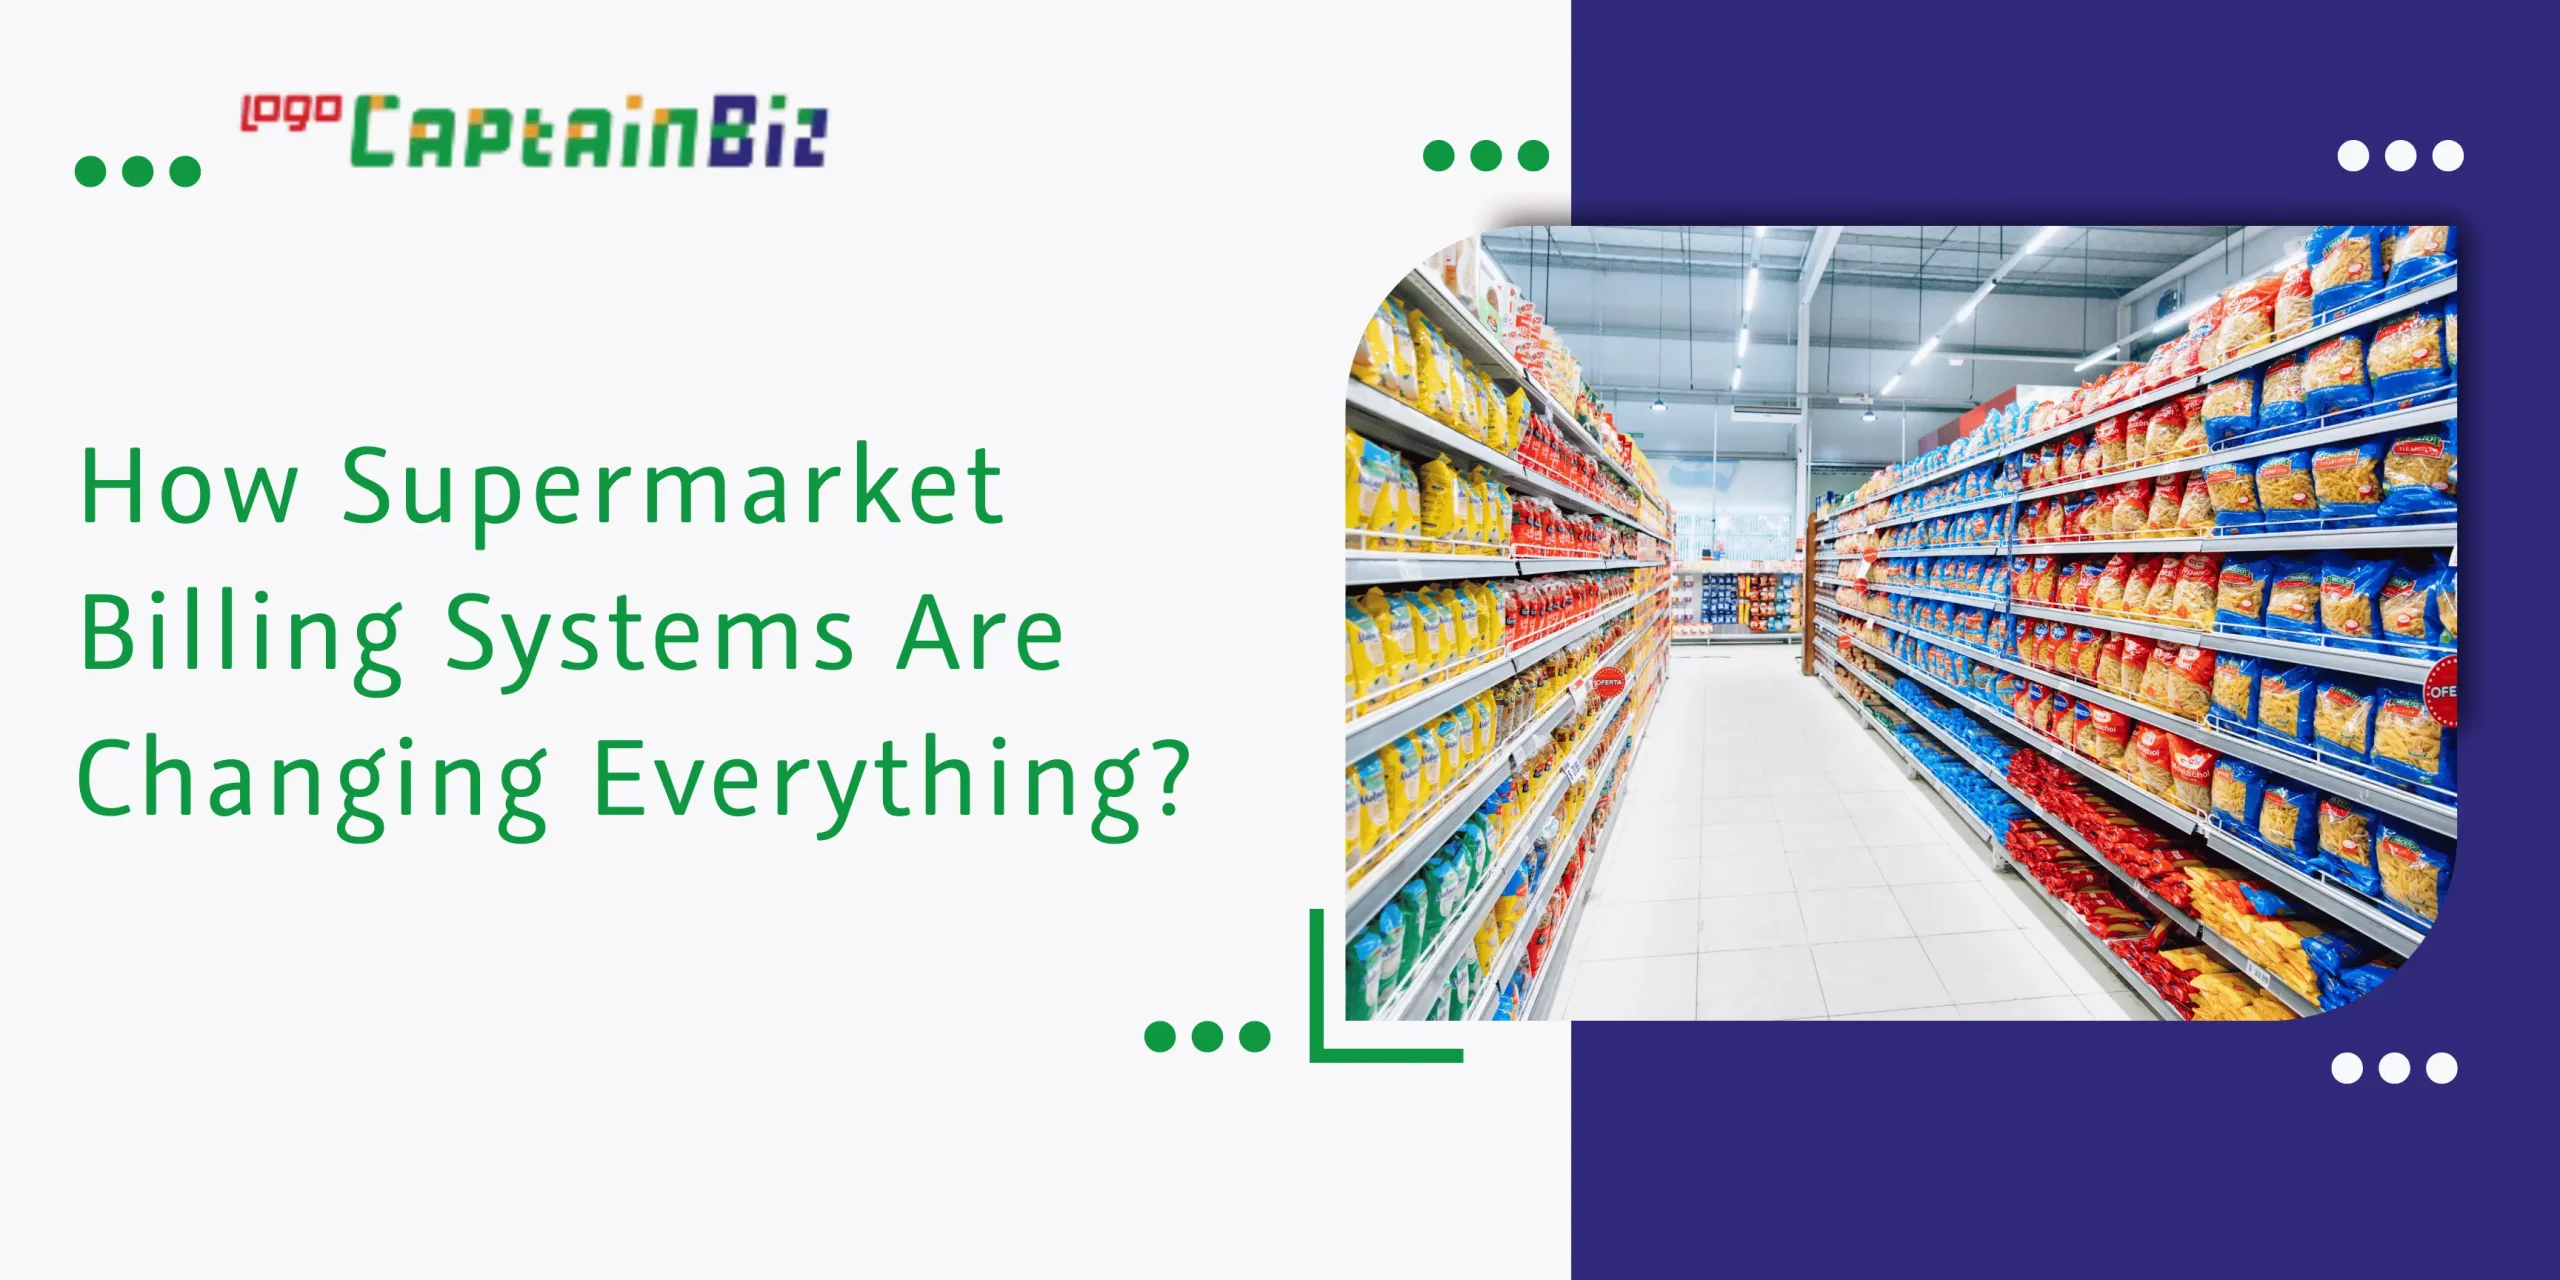 CaptainBiz: how supermarket billing systems are changing everything?